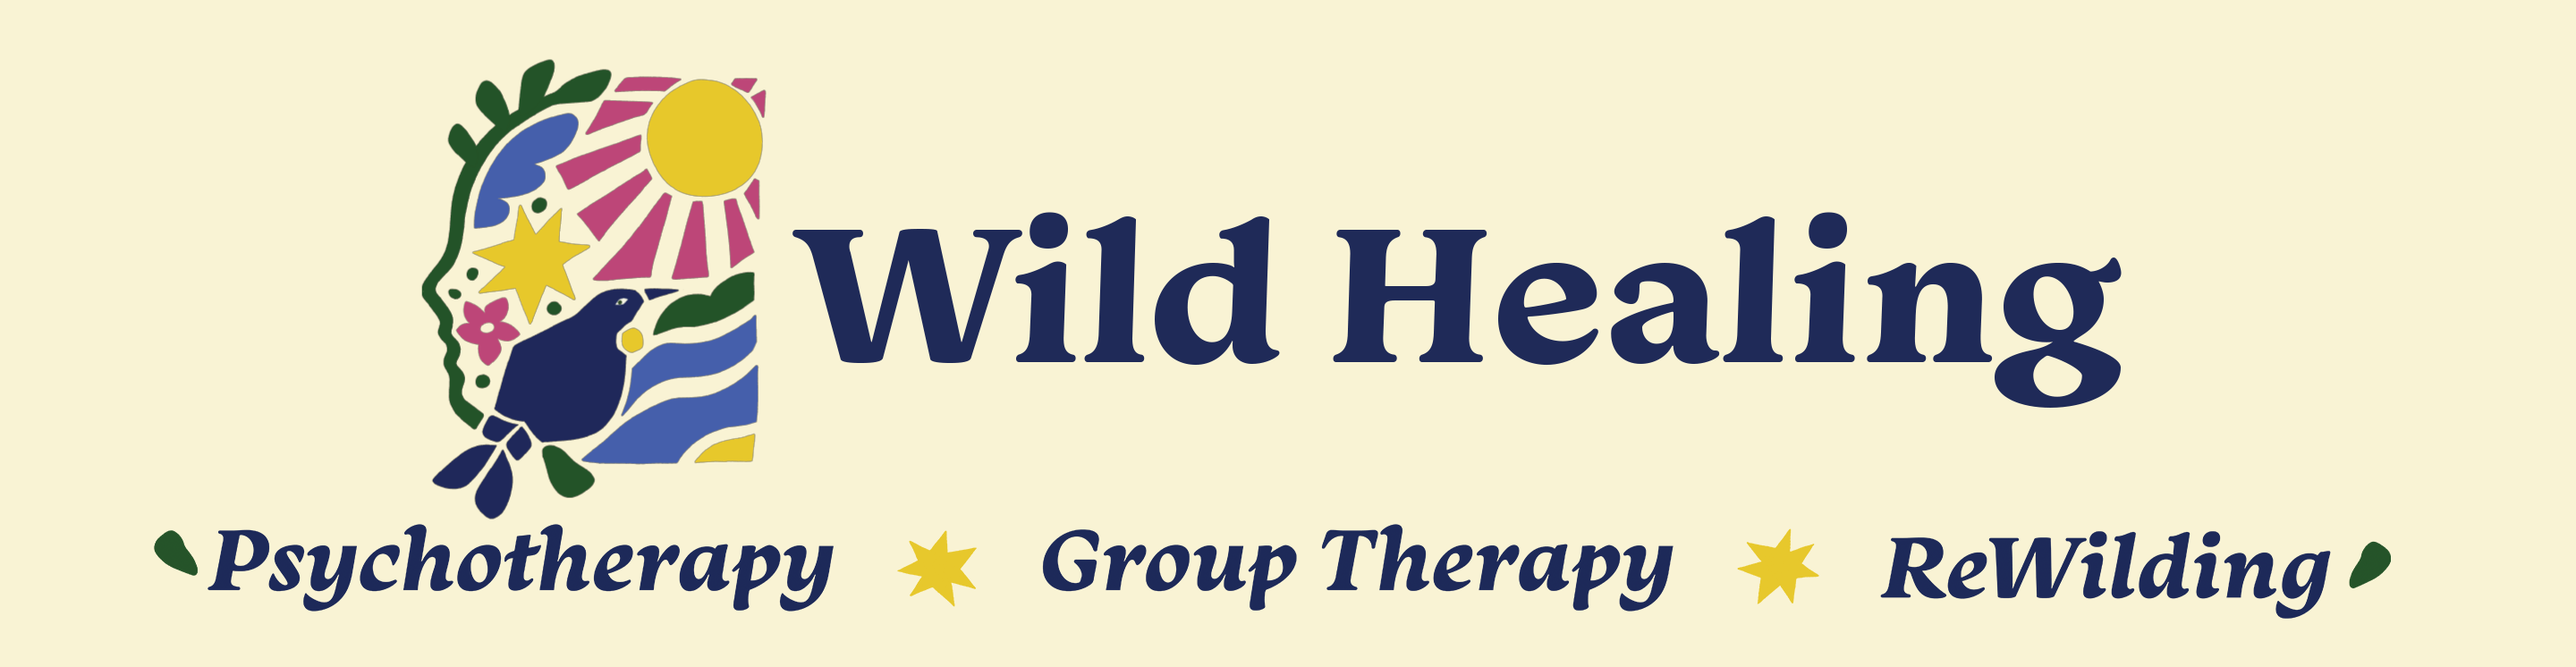 Wild Healing - Psychotherapy, Group Therapy, & ReWilding